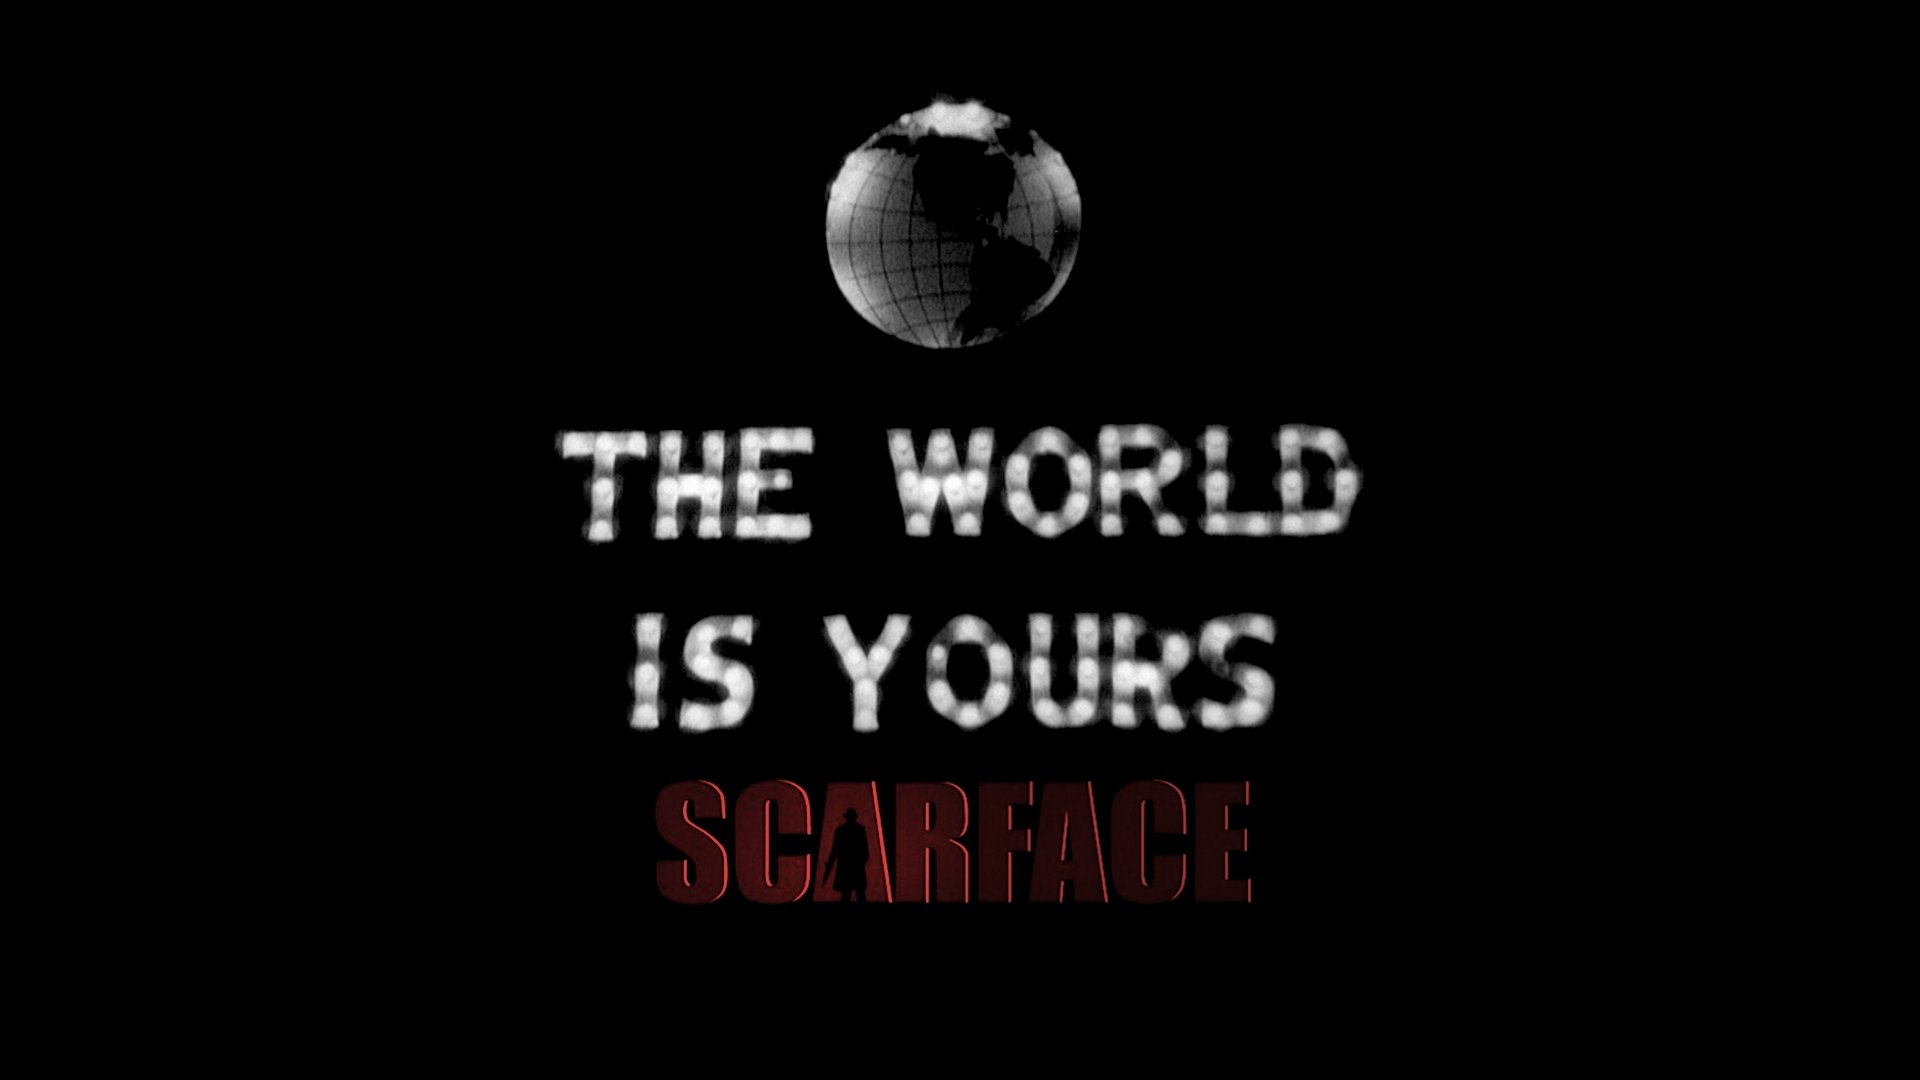 Scarface Wallpaper The World Is Yours Online  wwwillvacom 1693070610